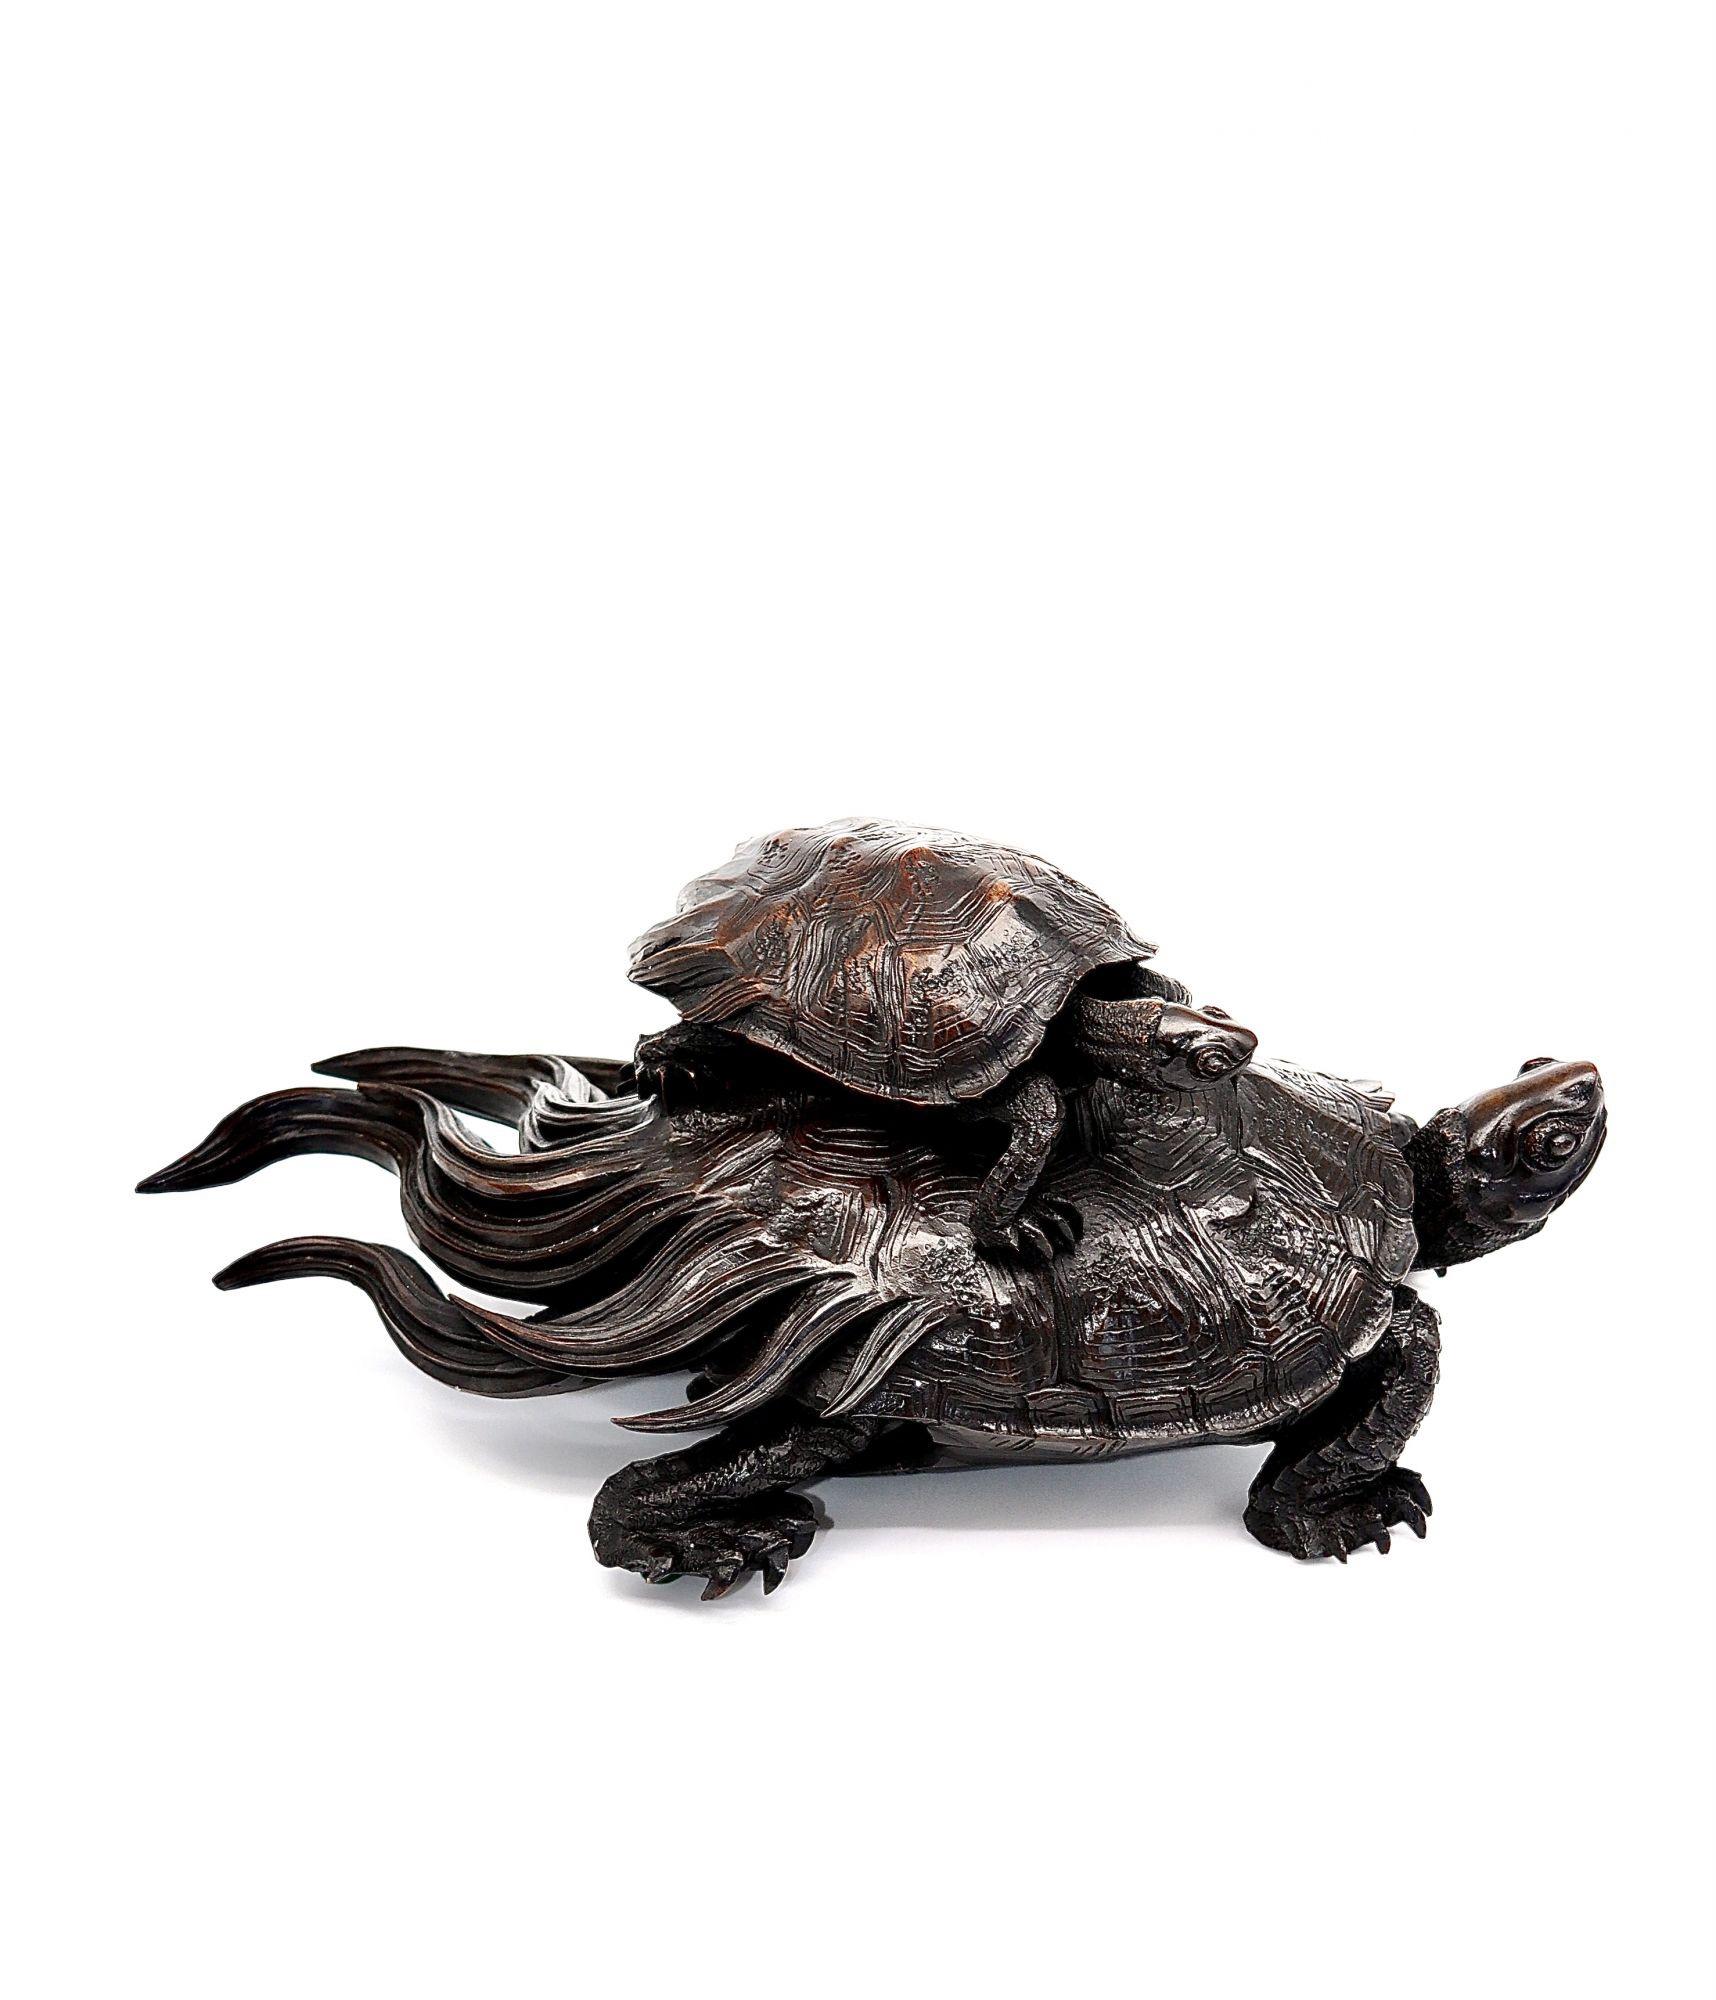 Antique Japanese Wood Carving of Two Minogames 'Mythological Turtle', 18th C For Sale 11